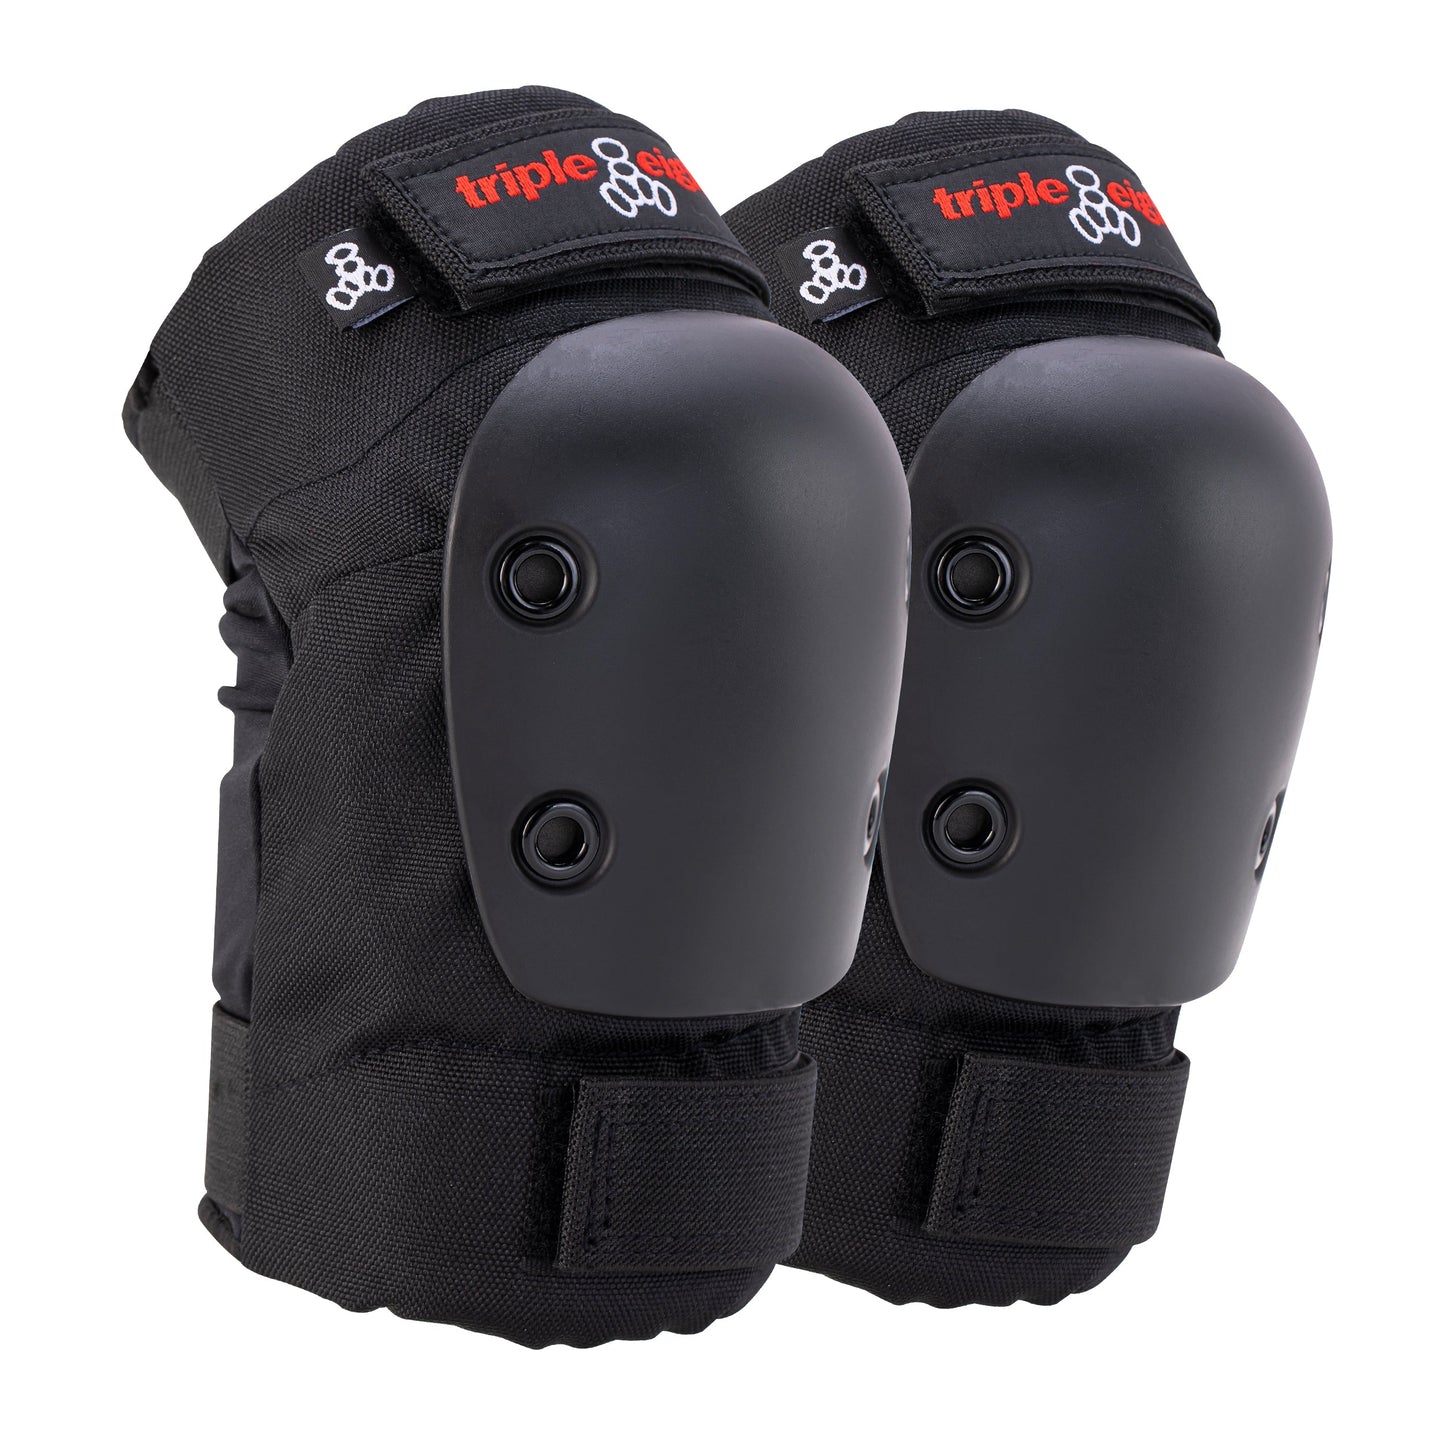 EP 55 Elbow Pads